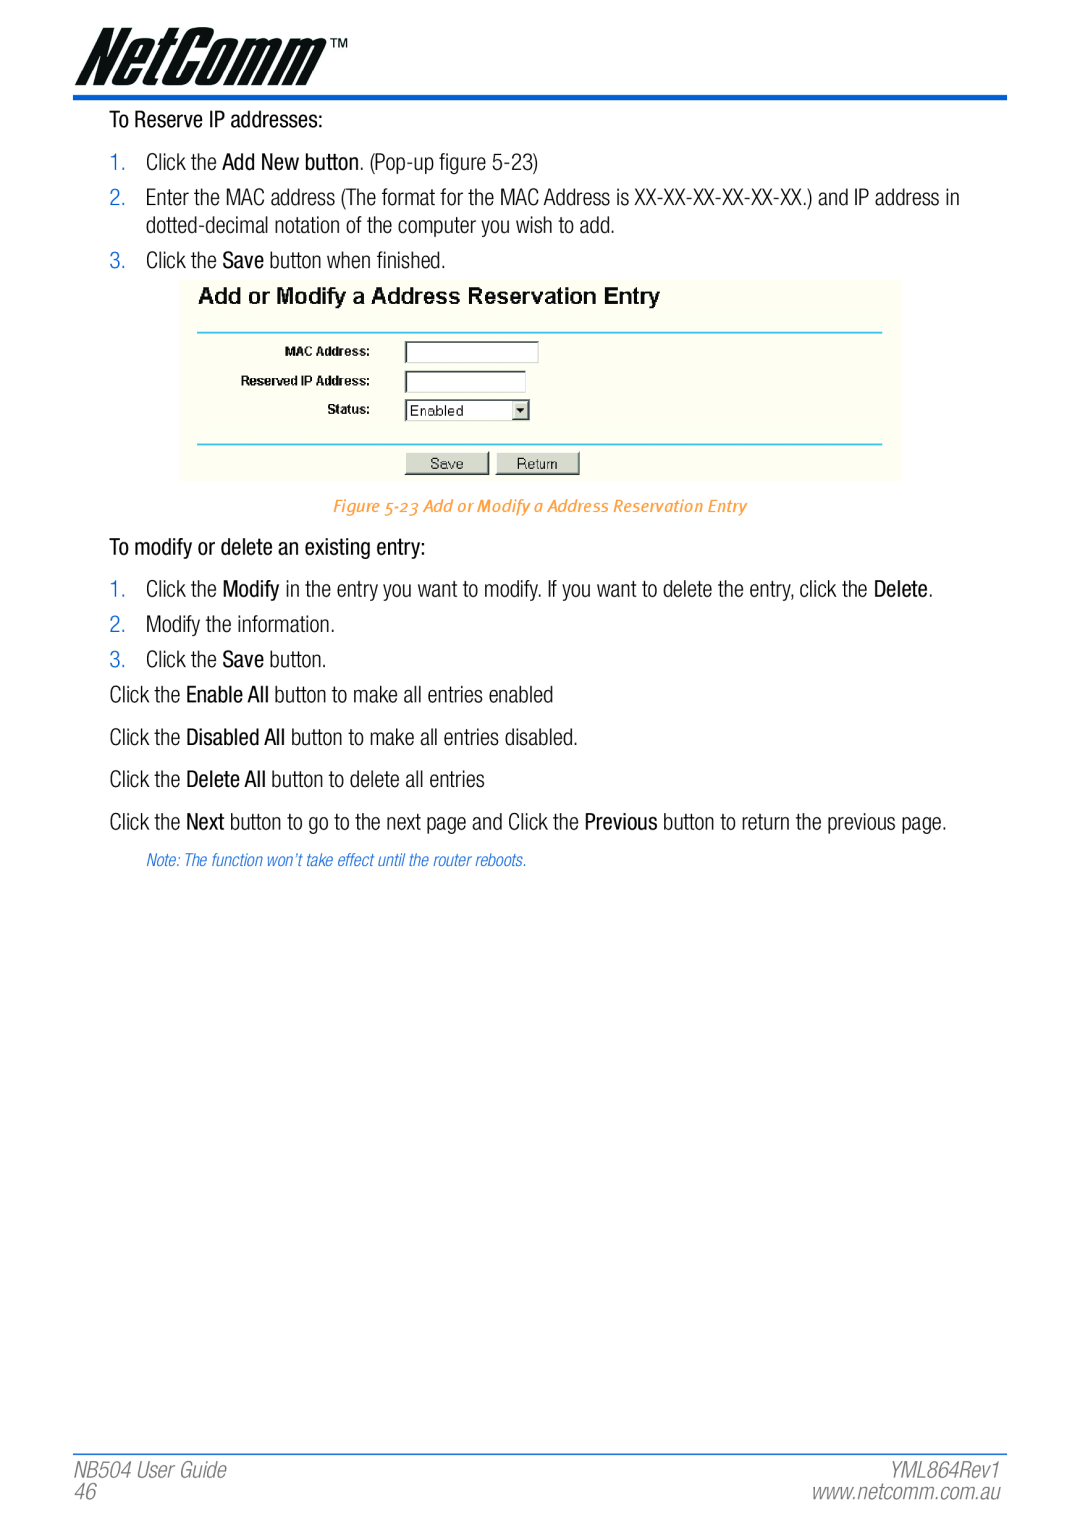 NetComm manual NB504 User Guide, 23 Add or Modify a Address Reservation Entry 